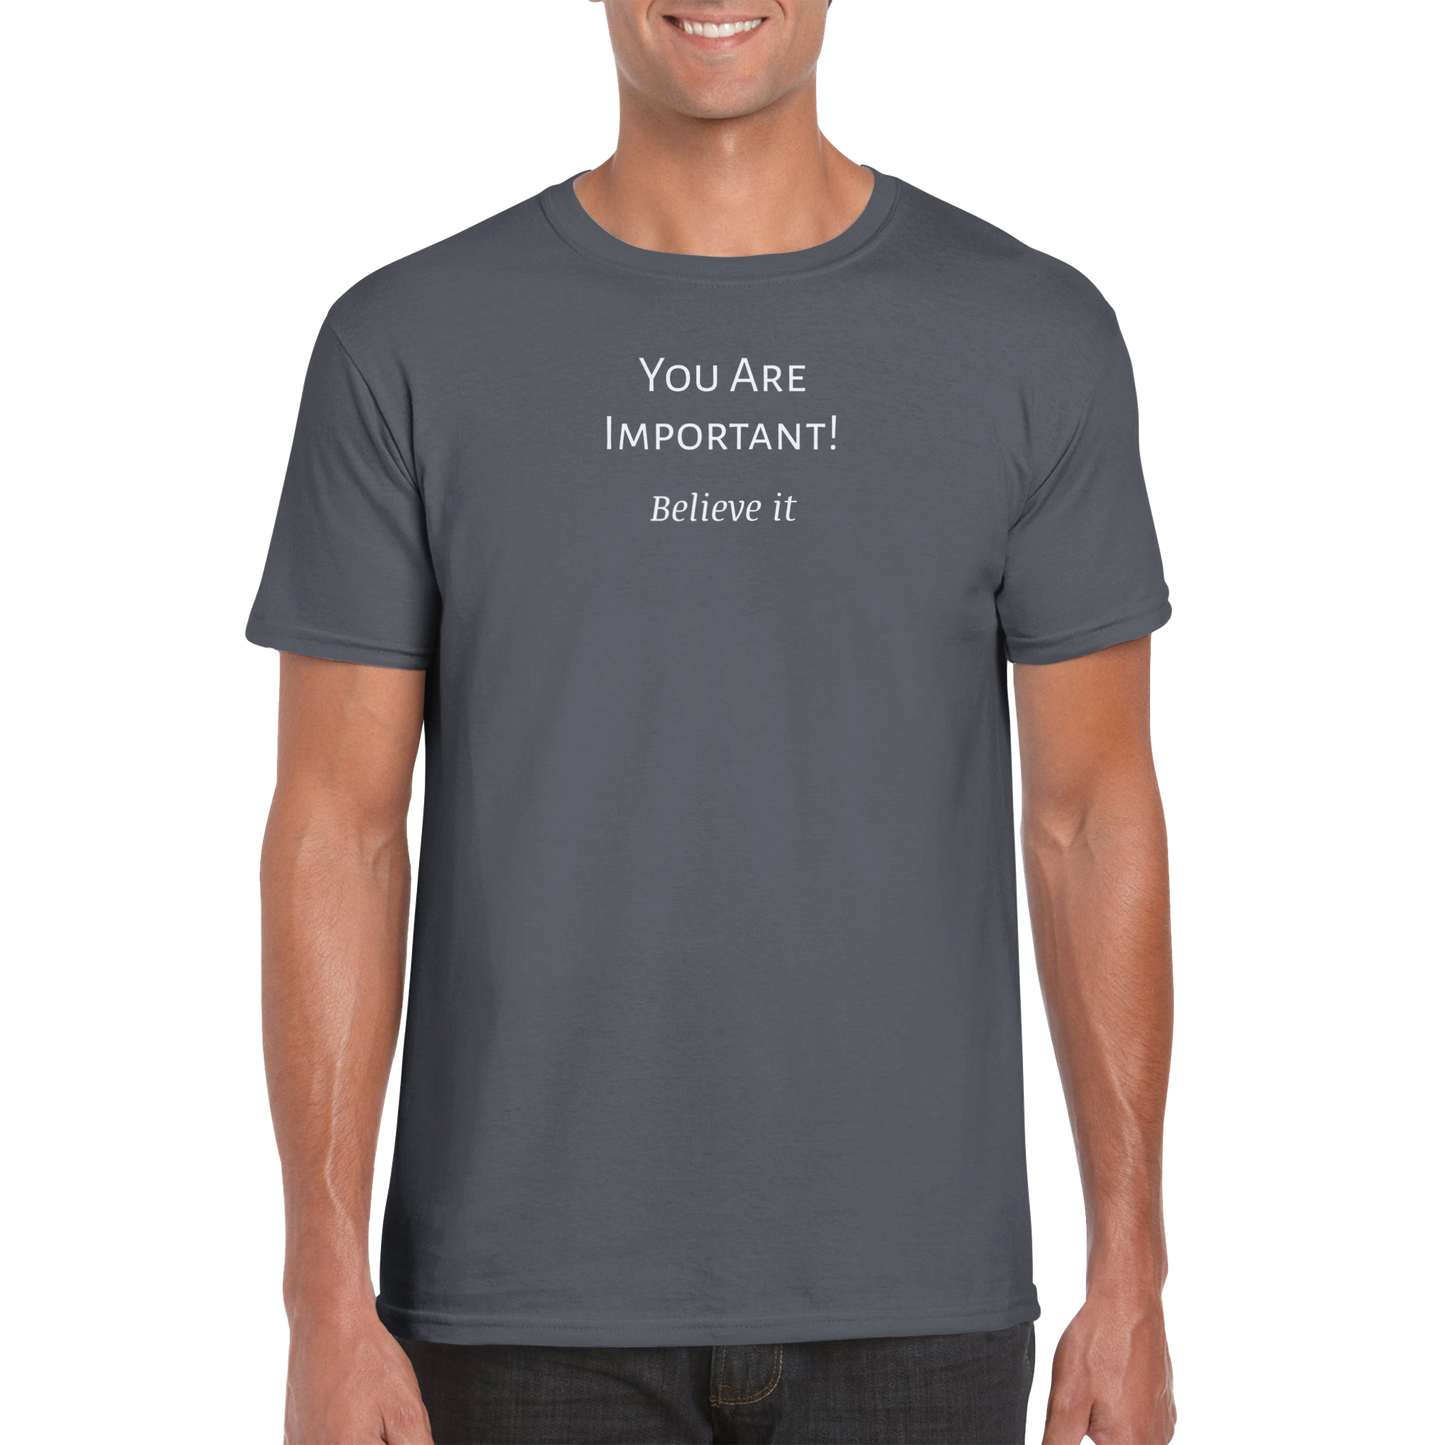 You Are Important! Classic Unisex Crewneck T-shirt. Wear it and share it forward